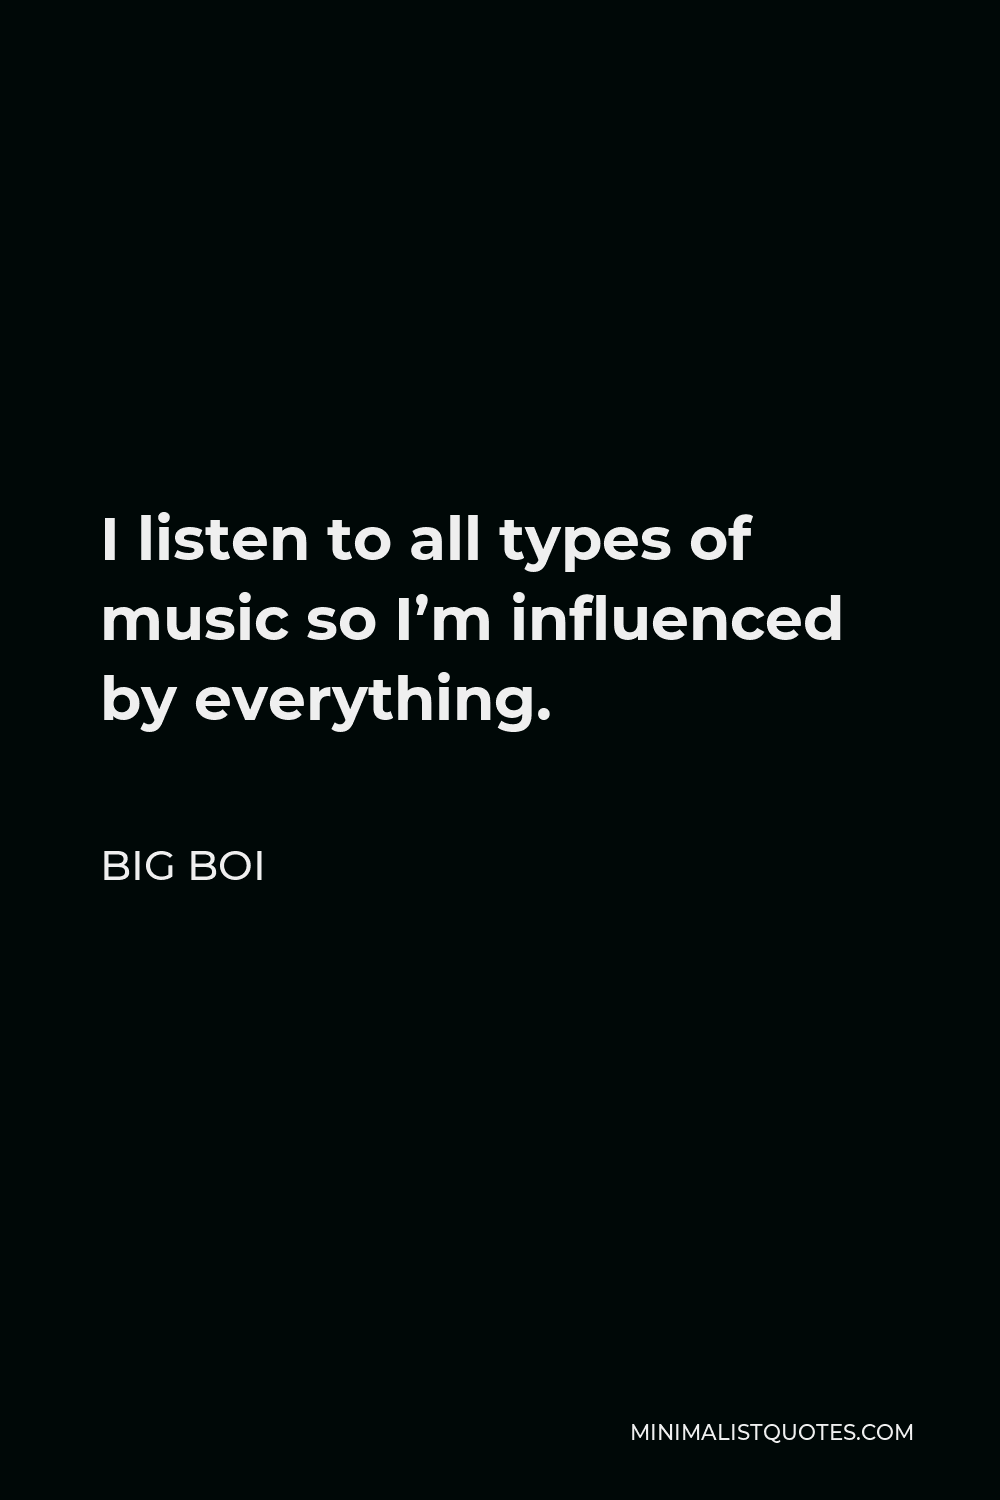 Big Boi Quote - I listen to all types of music so I’m influenced by everything.